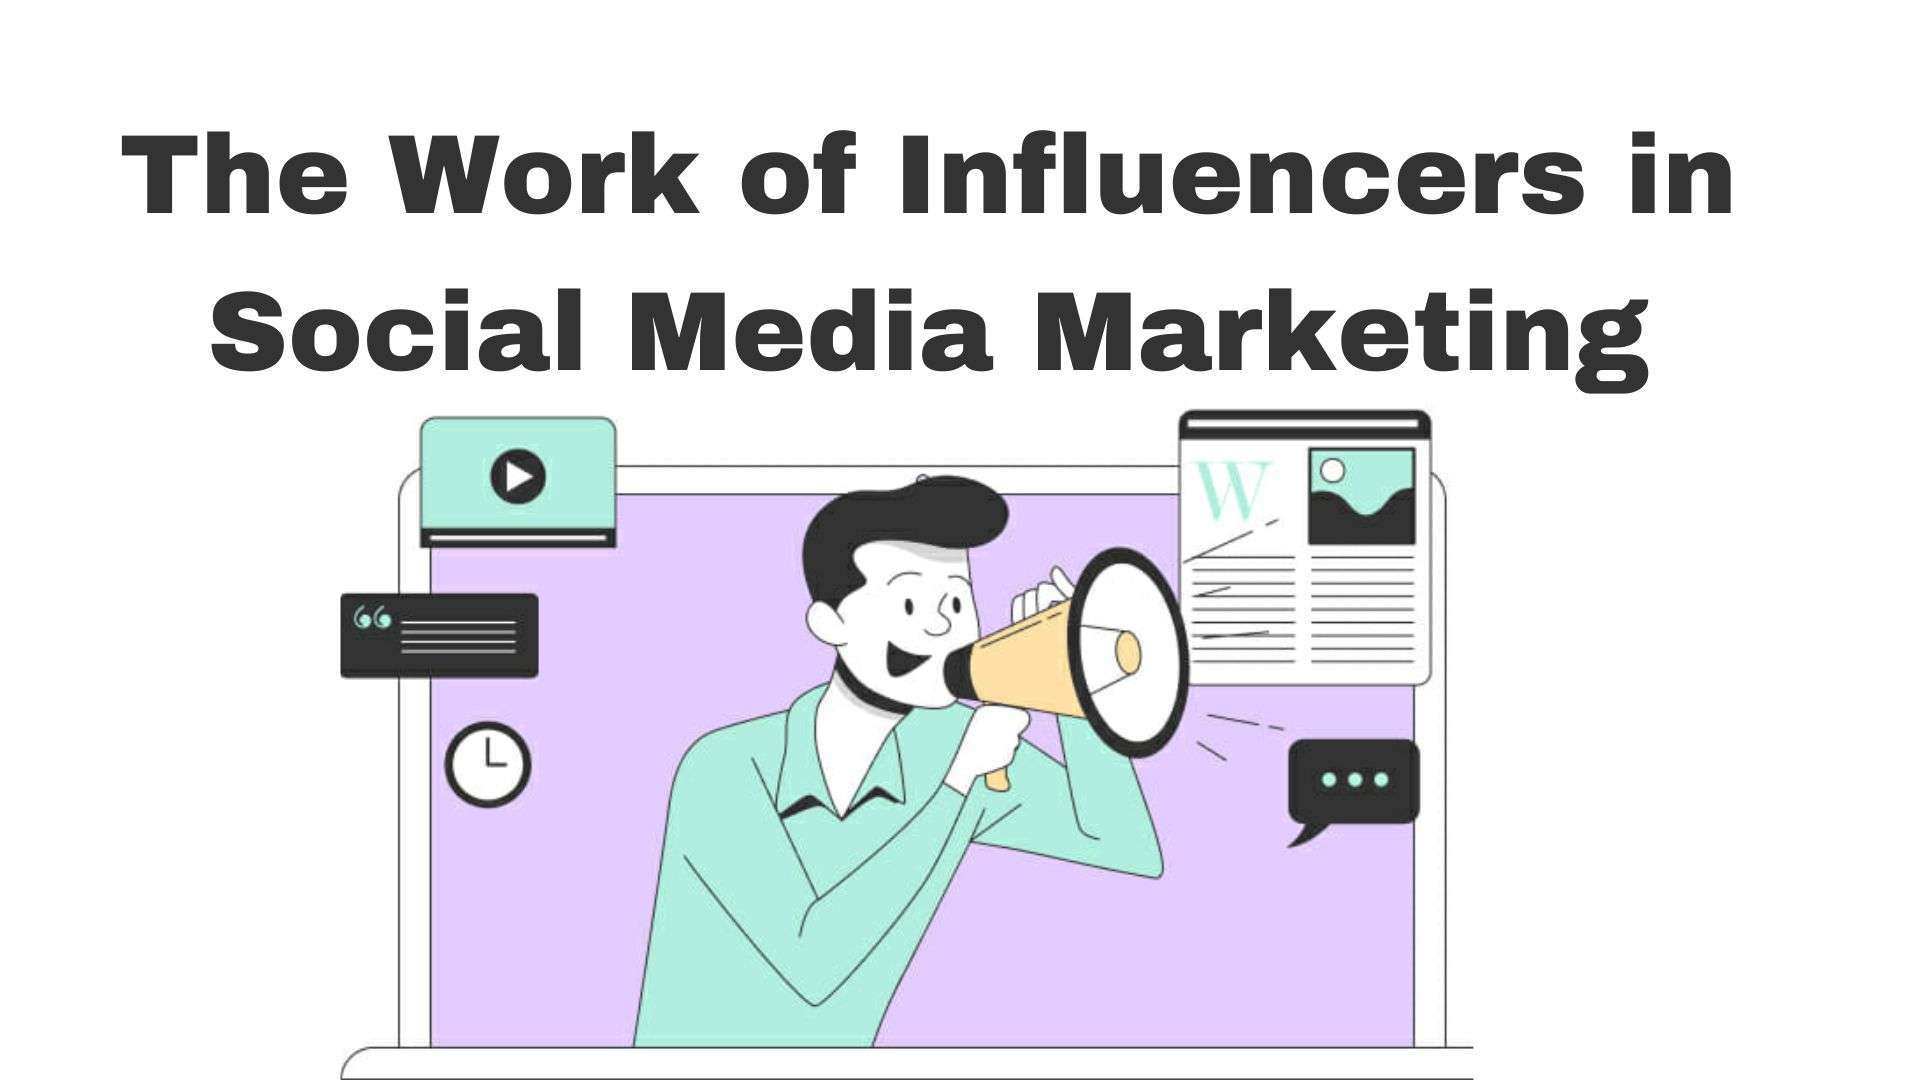 The Work of Influencers in Social Media Marketing